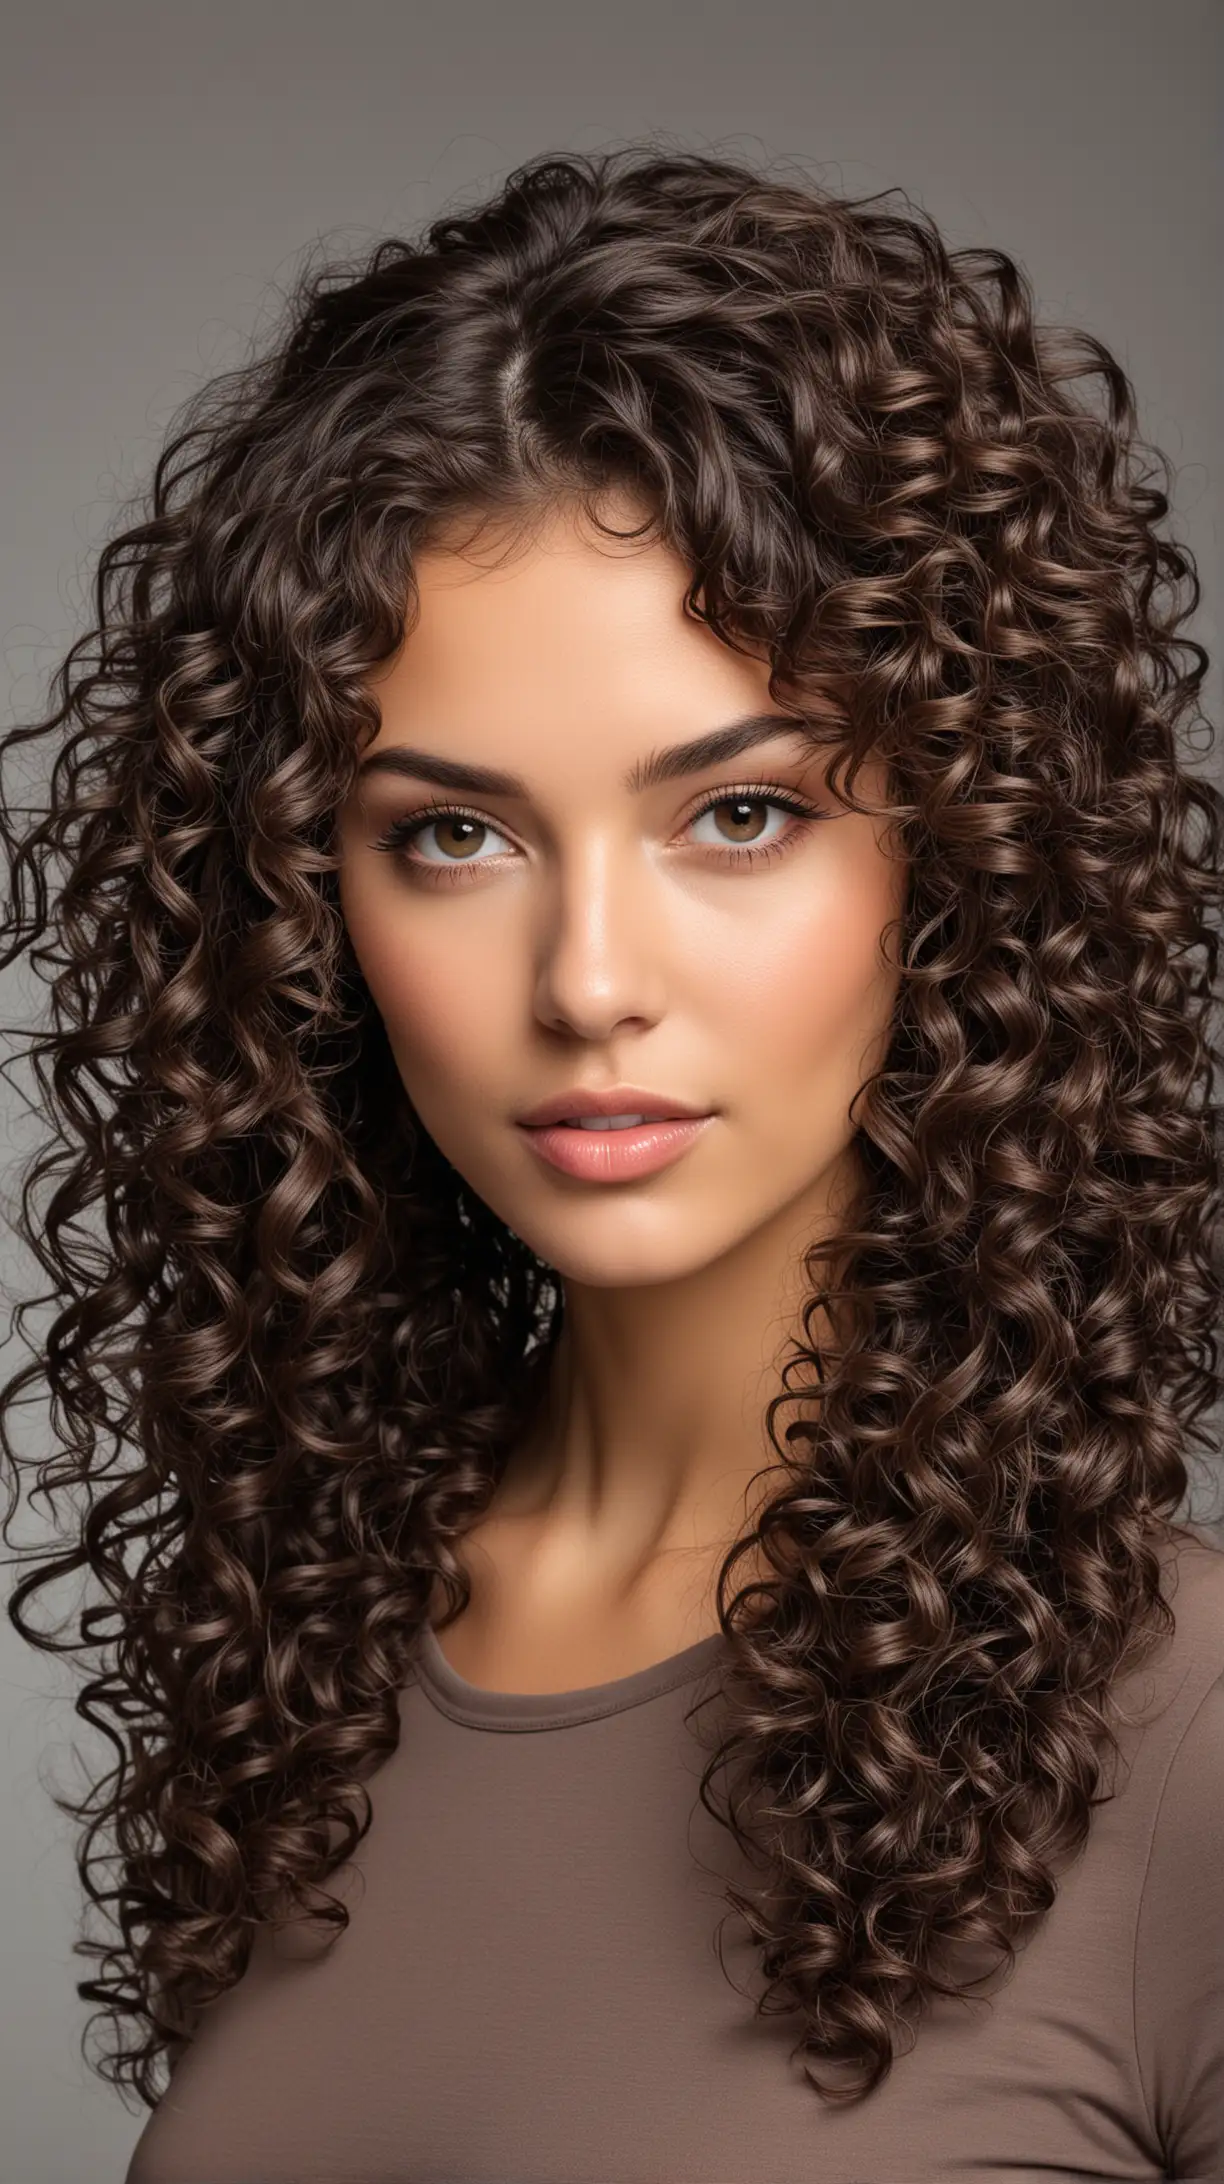 Urban Woman with Curly Butterfly Cascade Hairstyle